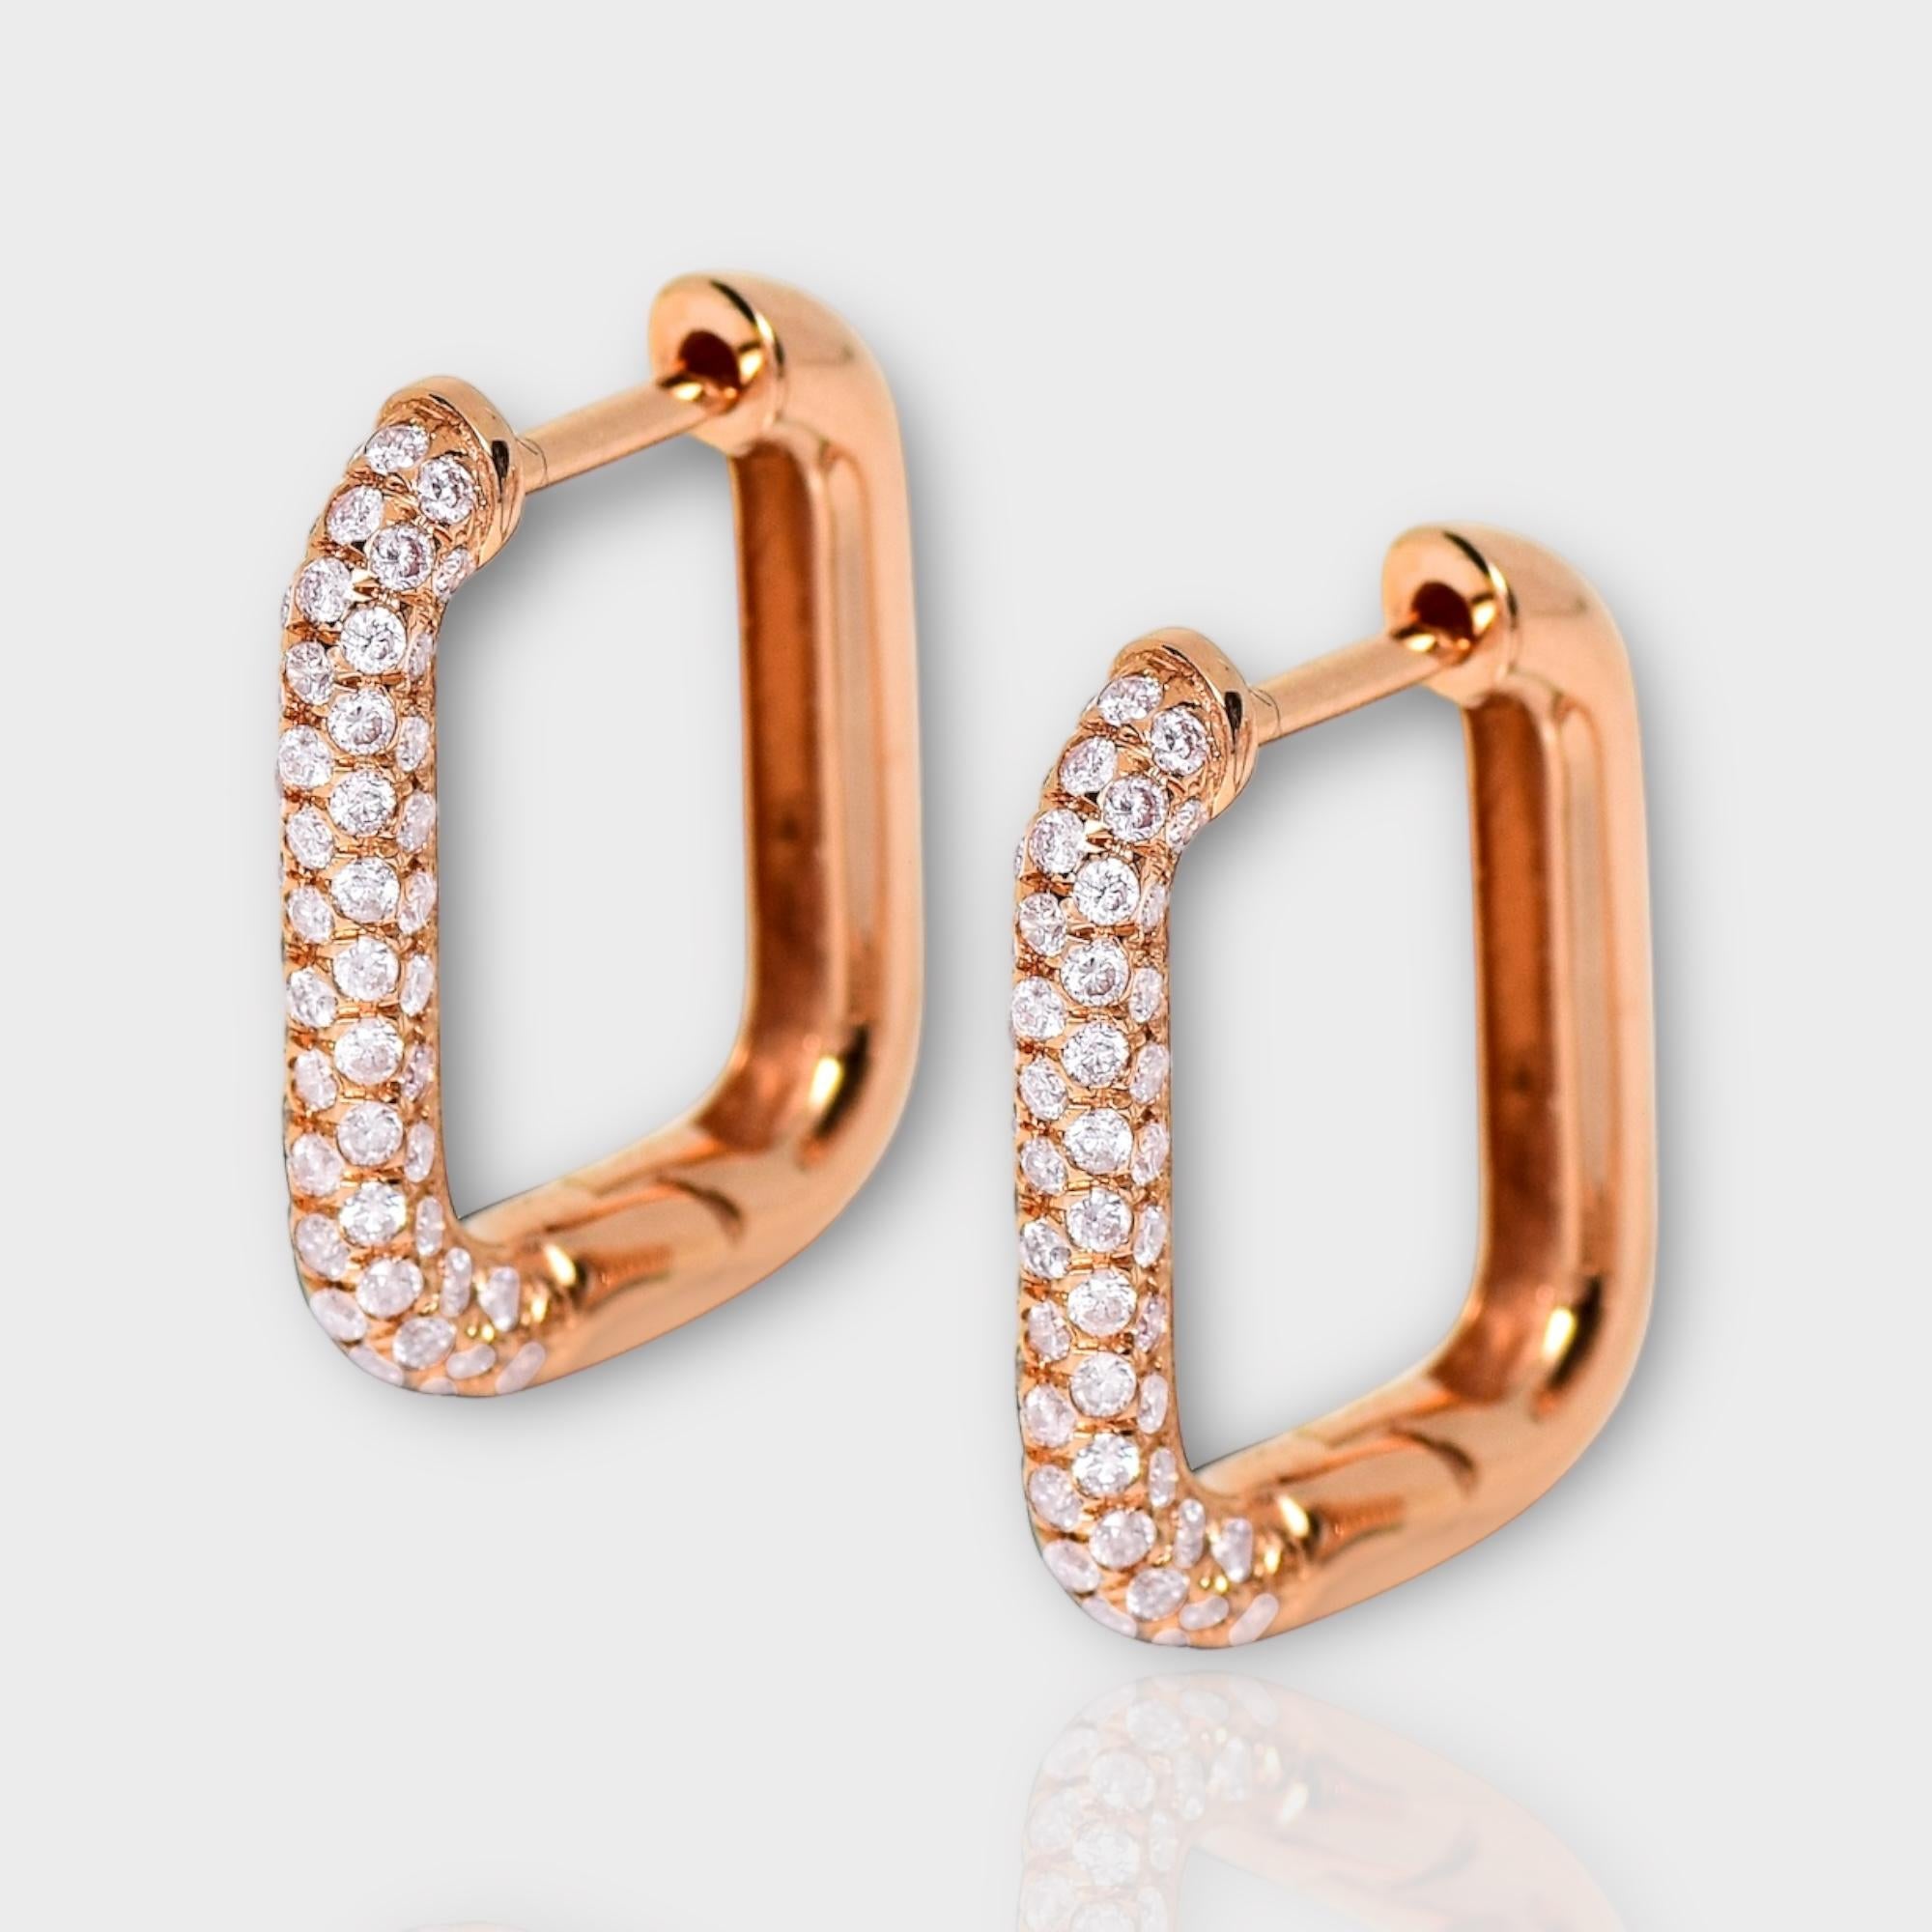 *IGI 14K 0.59 ct Natural Pink Diamonds Hoop Earrings*

This band features a stunning design with a hoop design from 14K rose gold. It is set with natural pink diamonds weighing 0.59 carats.

These earrings feature colorful natural diamonds and an